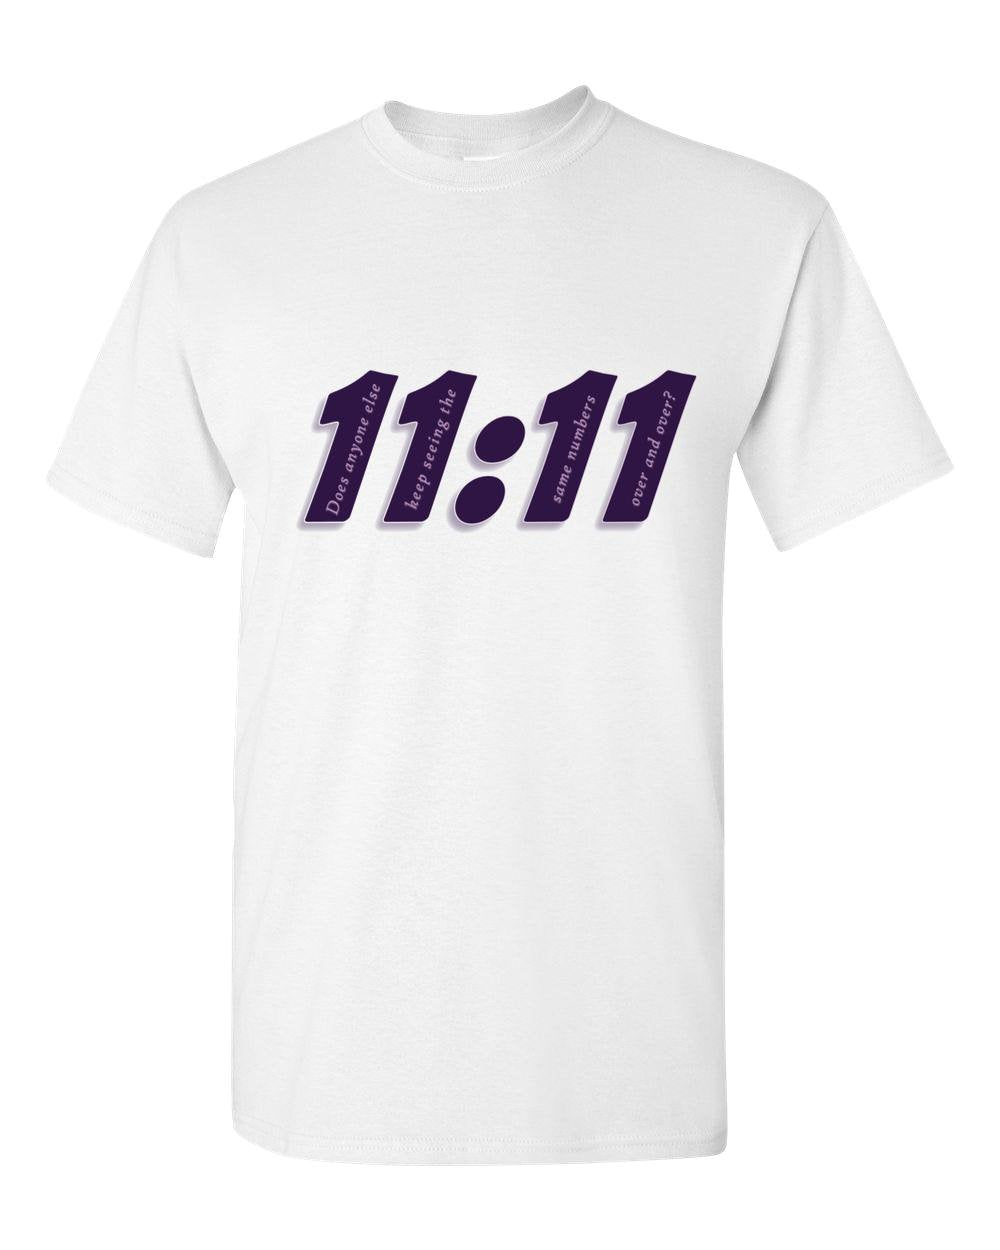 Angel 11:11 - Does Anyone Else...  Numbers  Adult Unisex T-Shirt